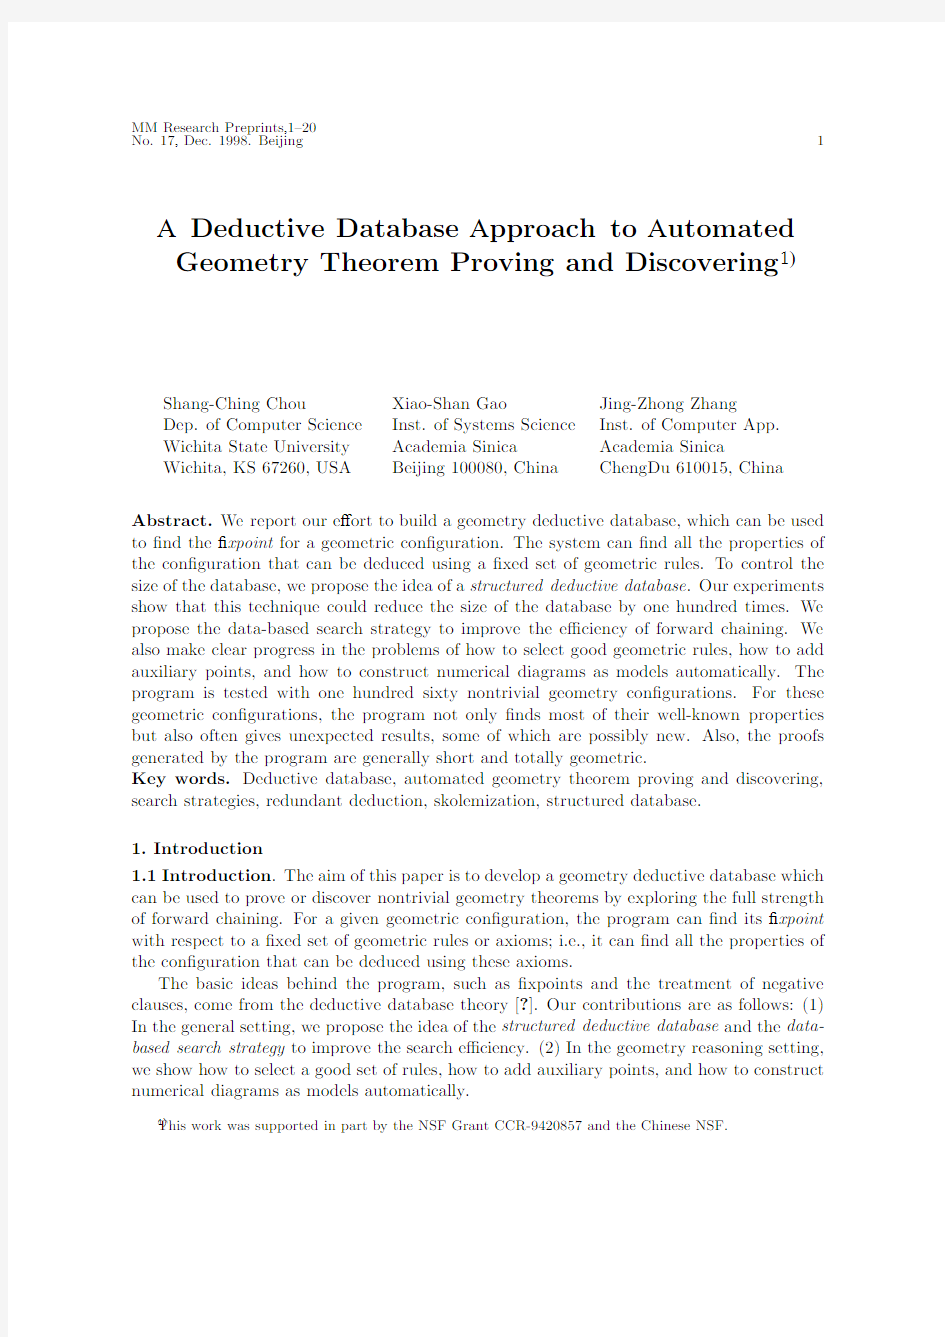 A deductive database approach to automated geometry theorem proving and discovering